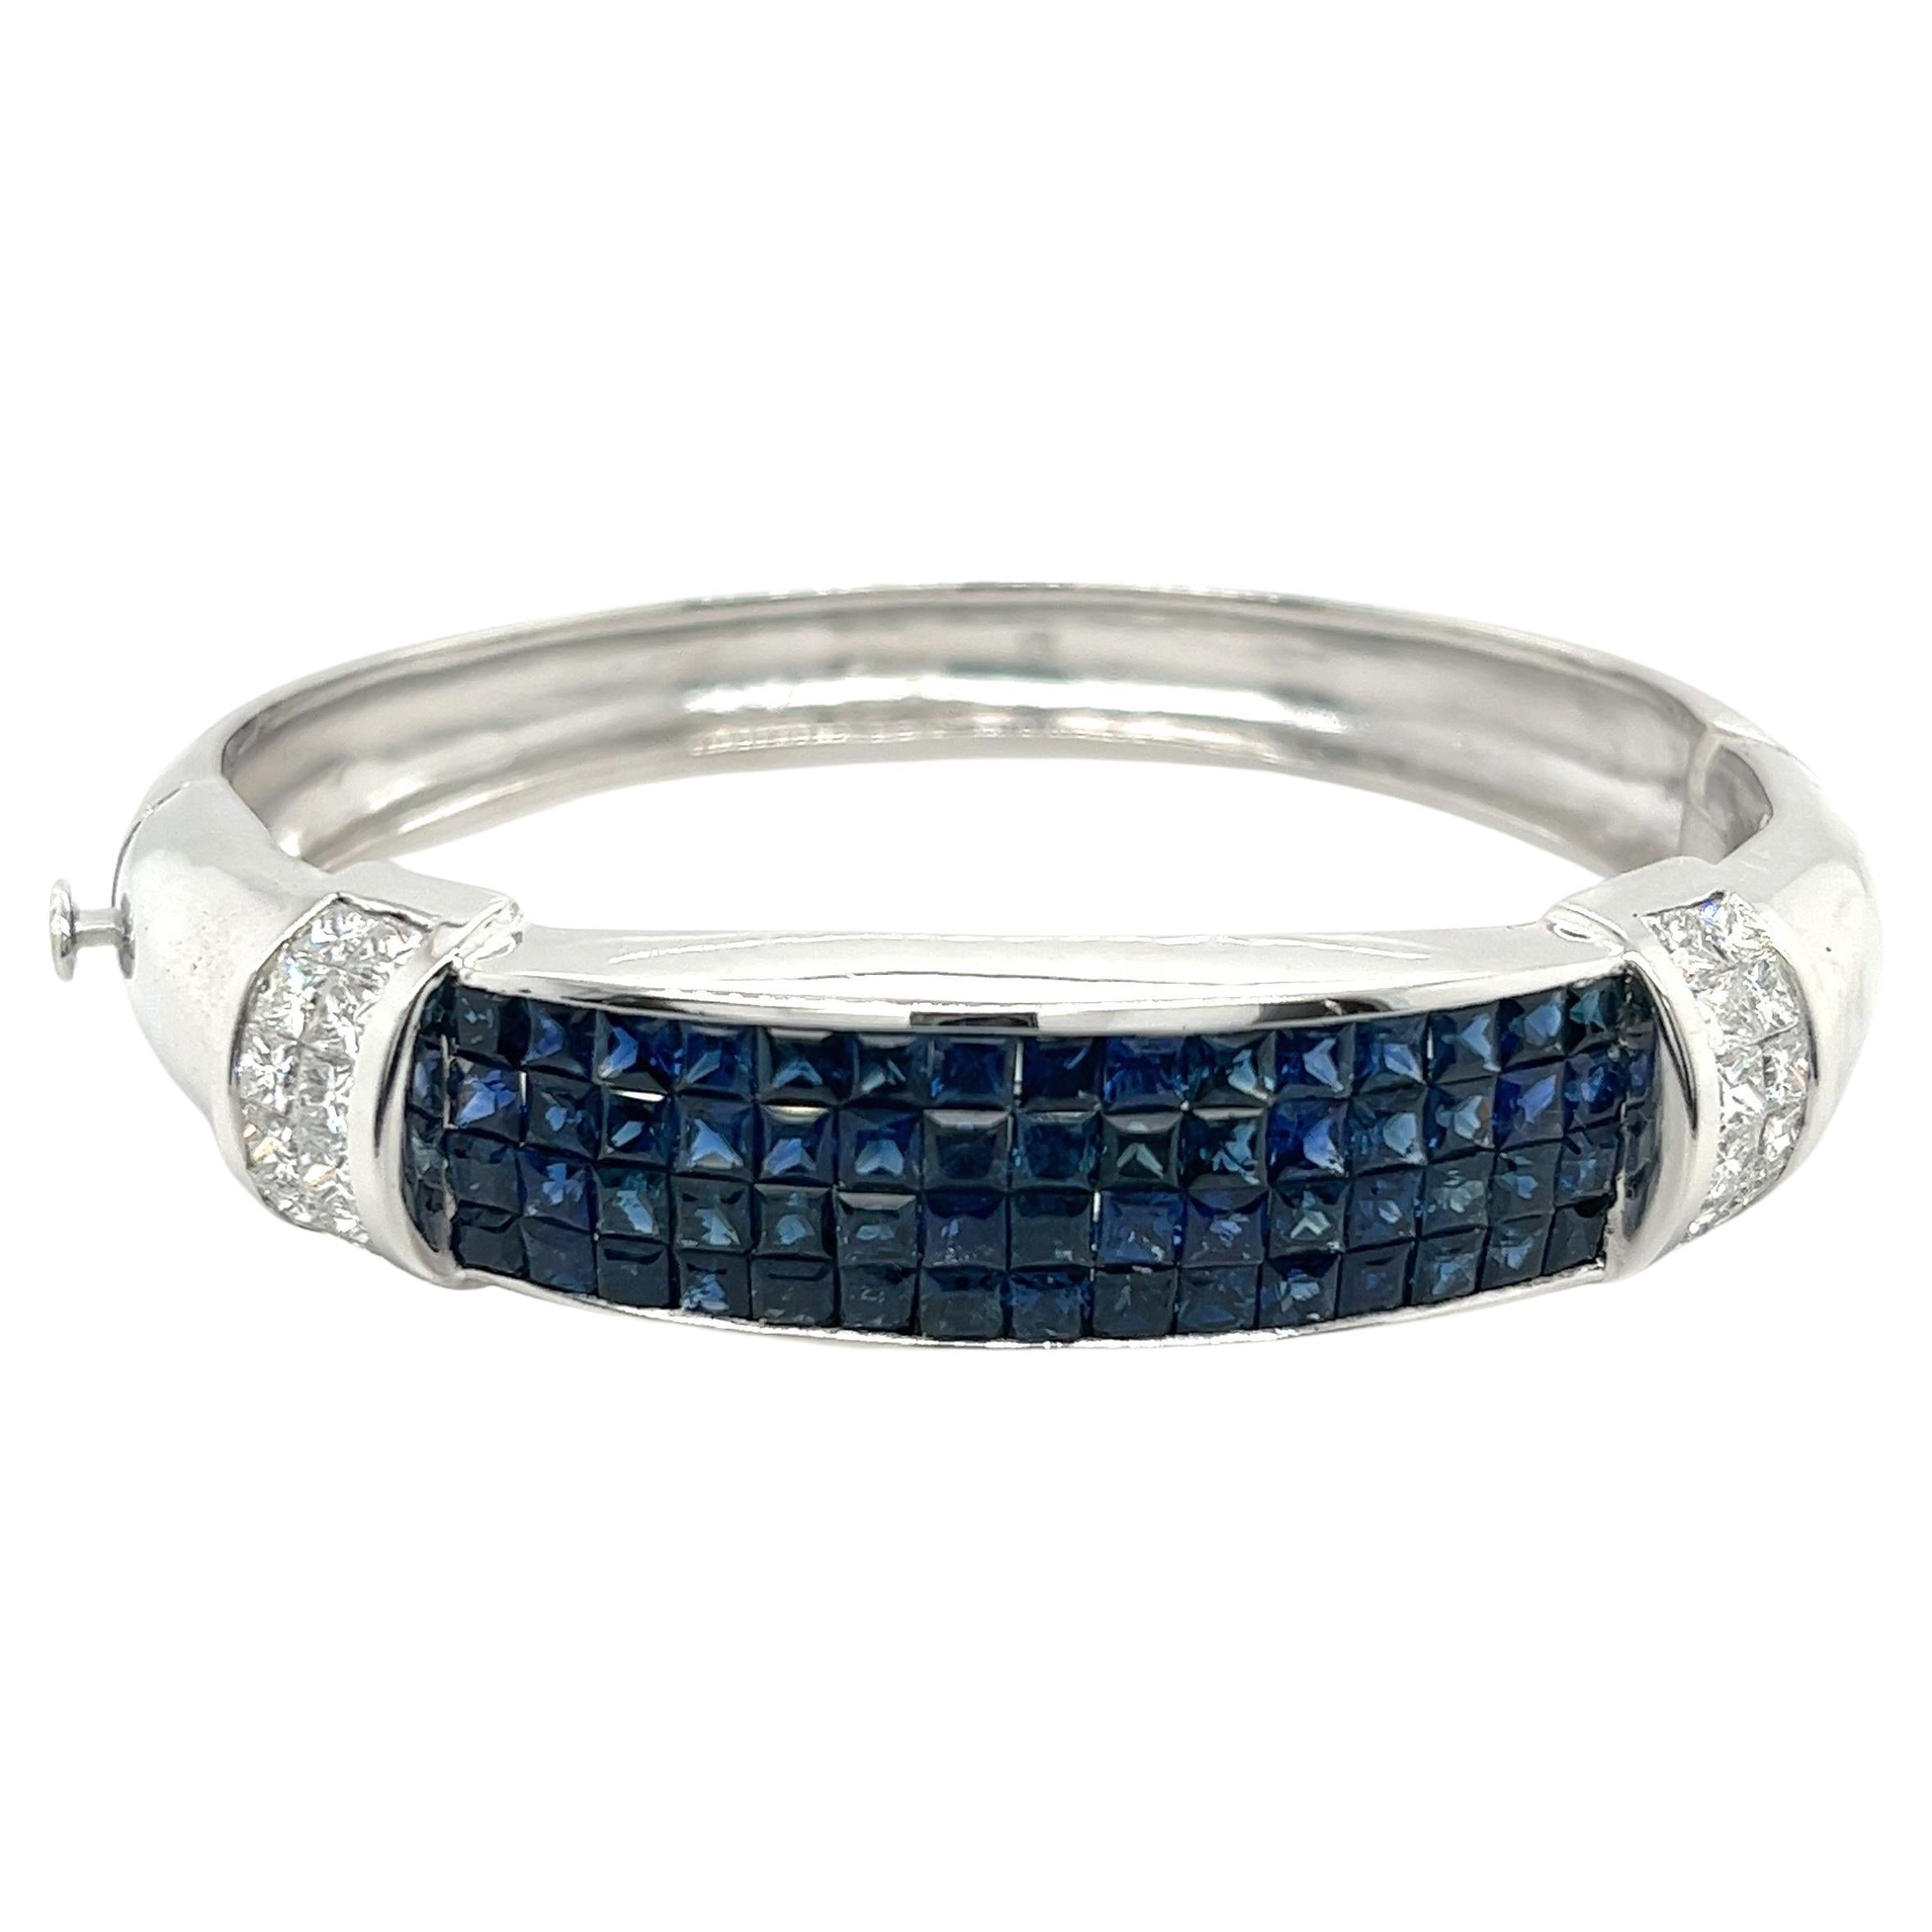 14 karat solid white gold sets 64 square cut Blue Sapphires flanked by 24 princess cut diamonds. Invisible set with expert precision and craftsmanship. Over 19 carats in gemstone excellence.

14.7 MM bracelet width offers excellent coverage on the